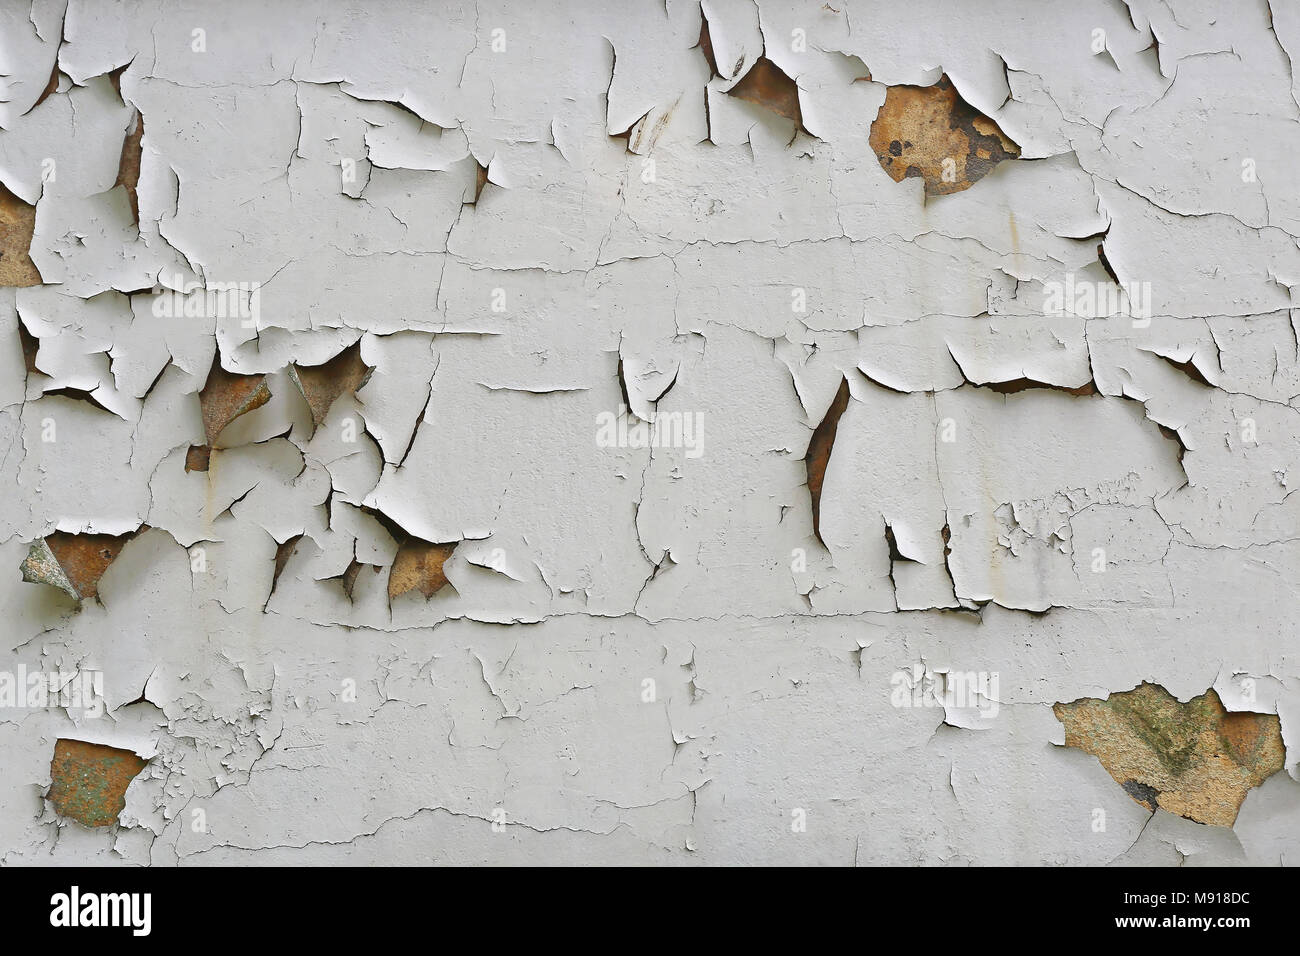 Chipped Paint Peeling Off House Wall Stock Photo - Alamy